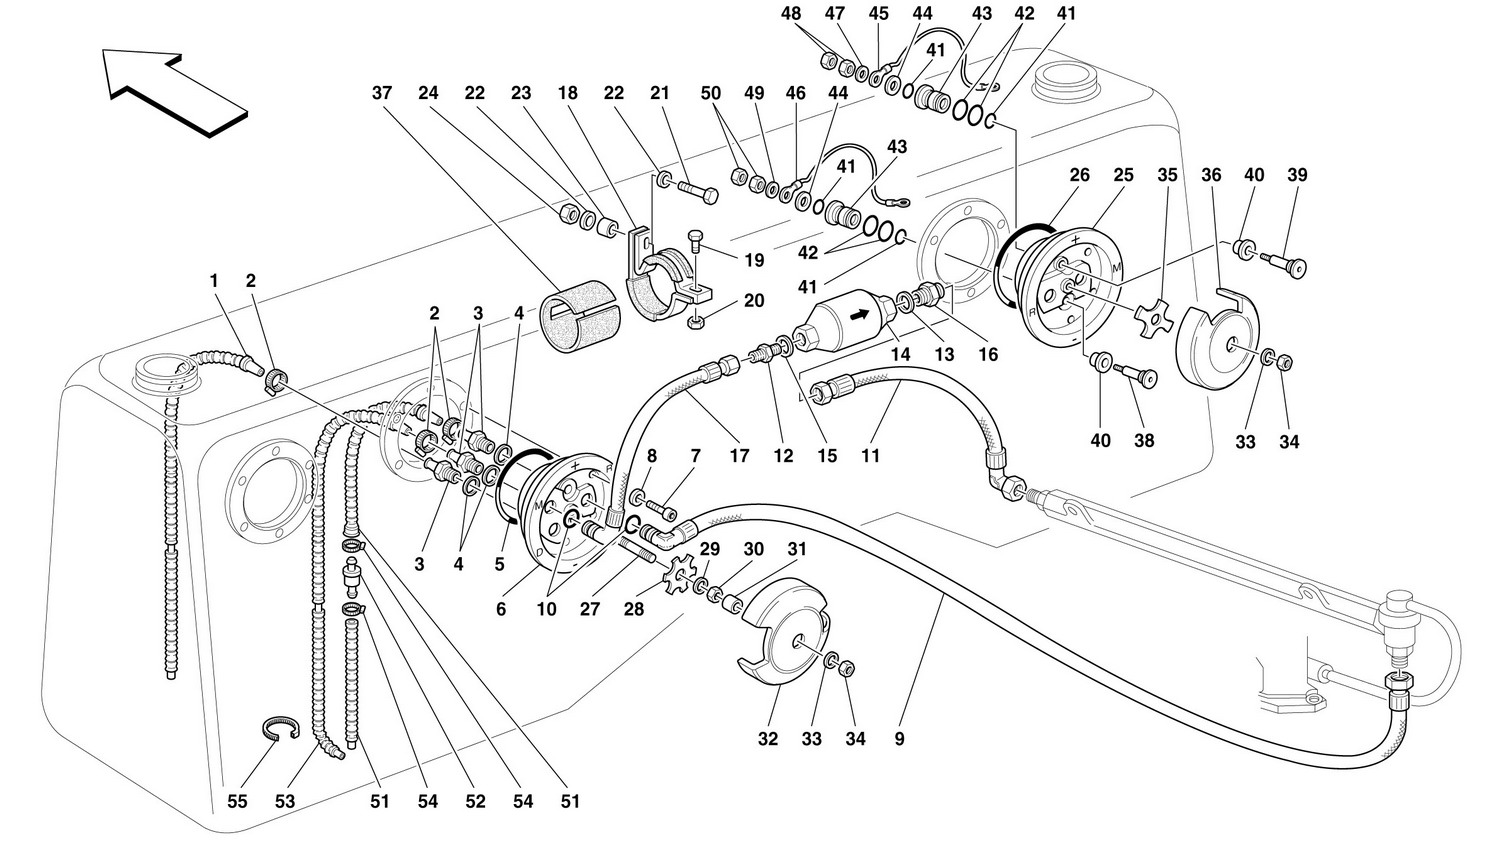 Schematic: Fuel Injection Sytem